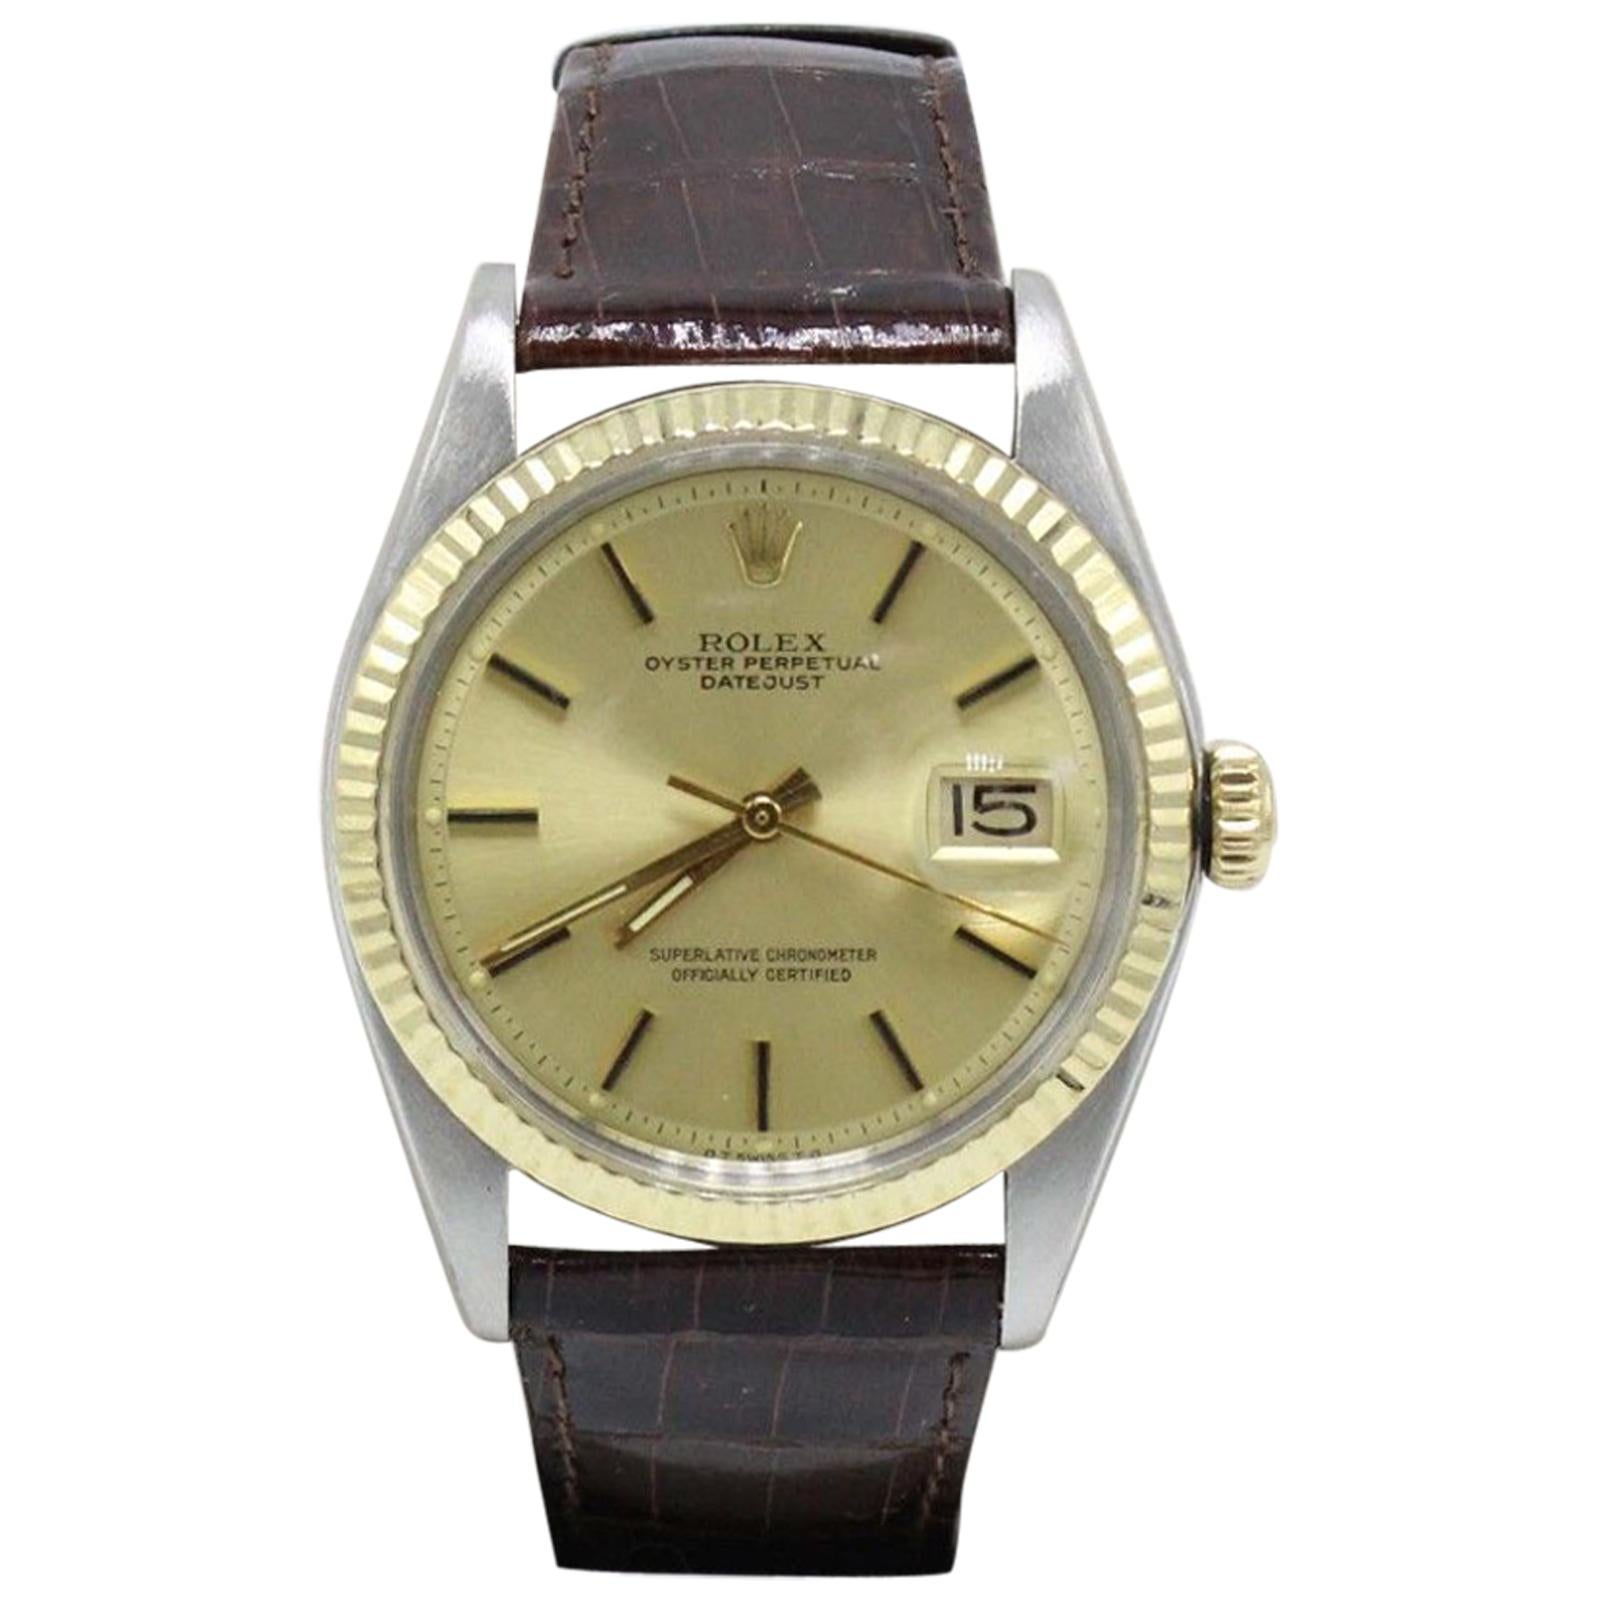 Rolex Datejust 1601 14 Karat Yellow Gold and Stainless Steel on Leather Band